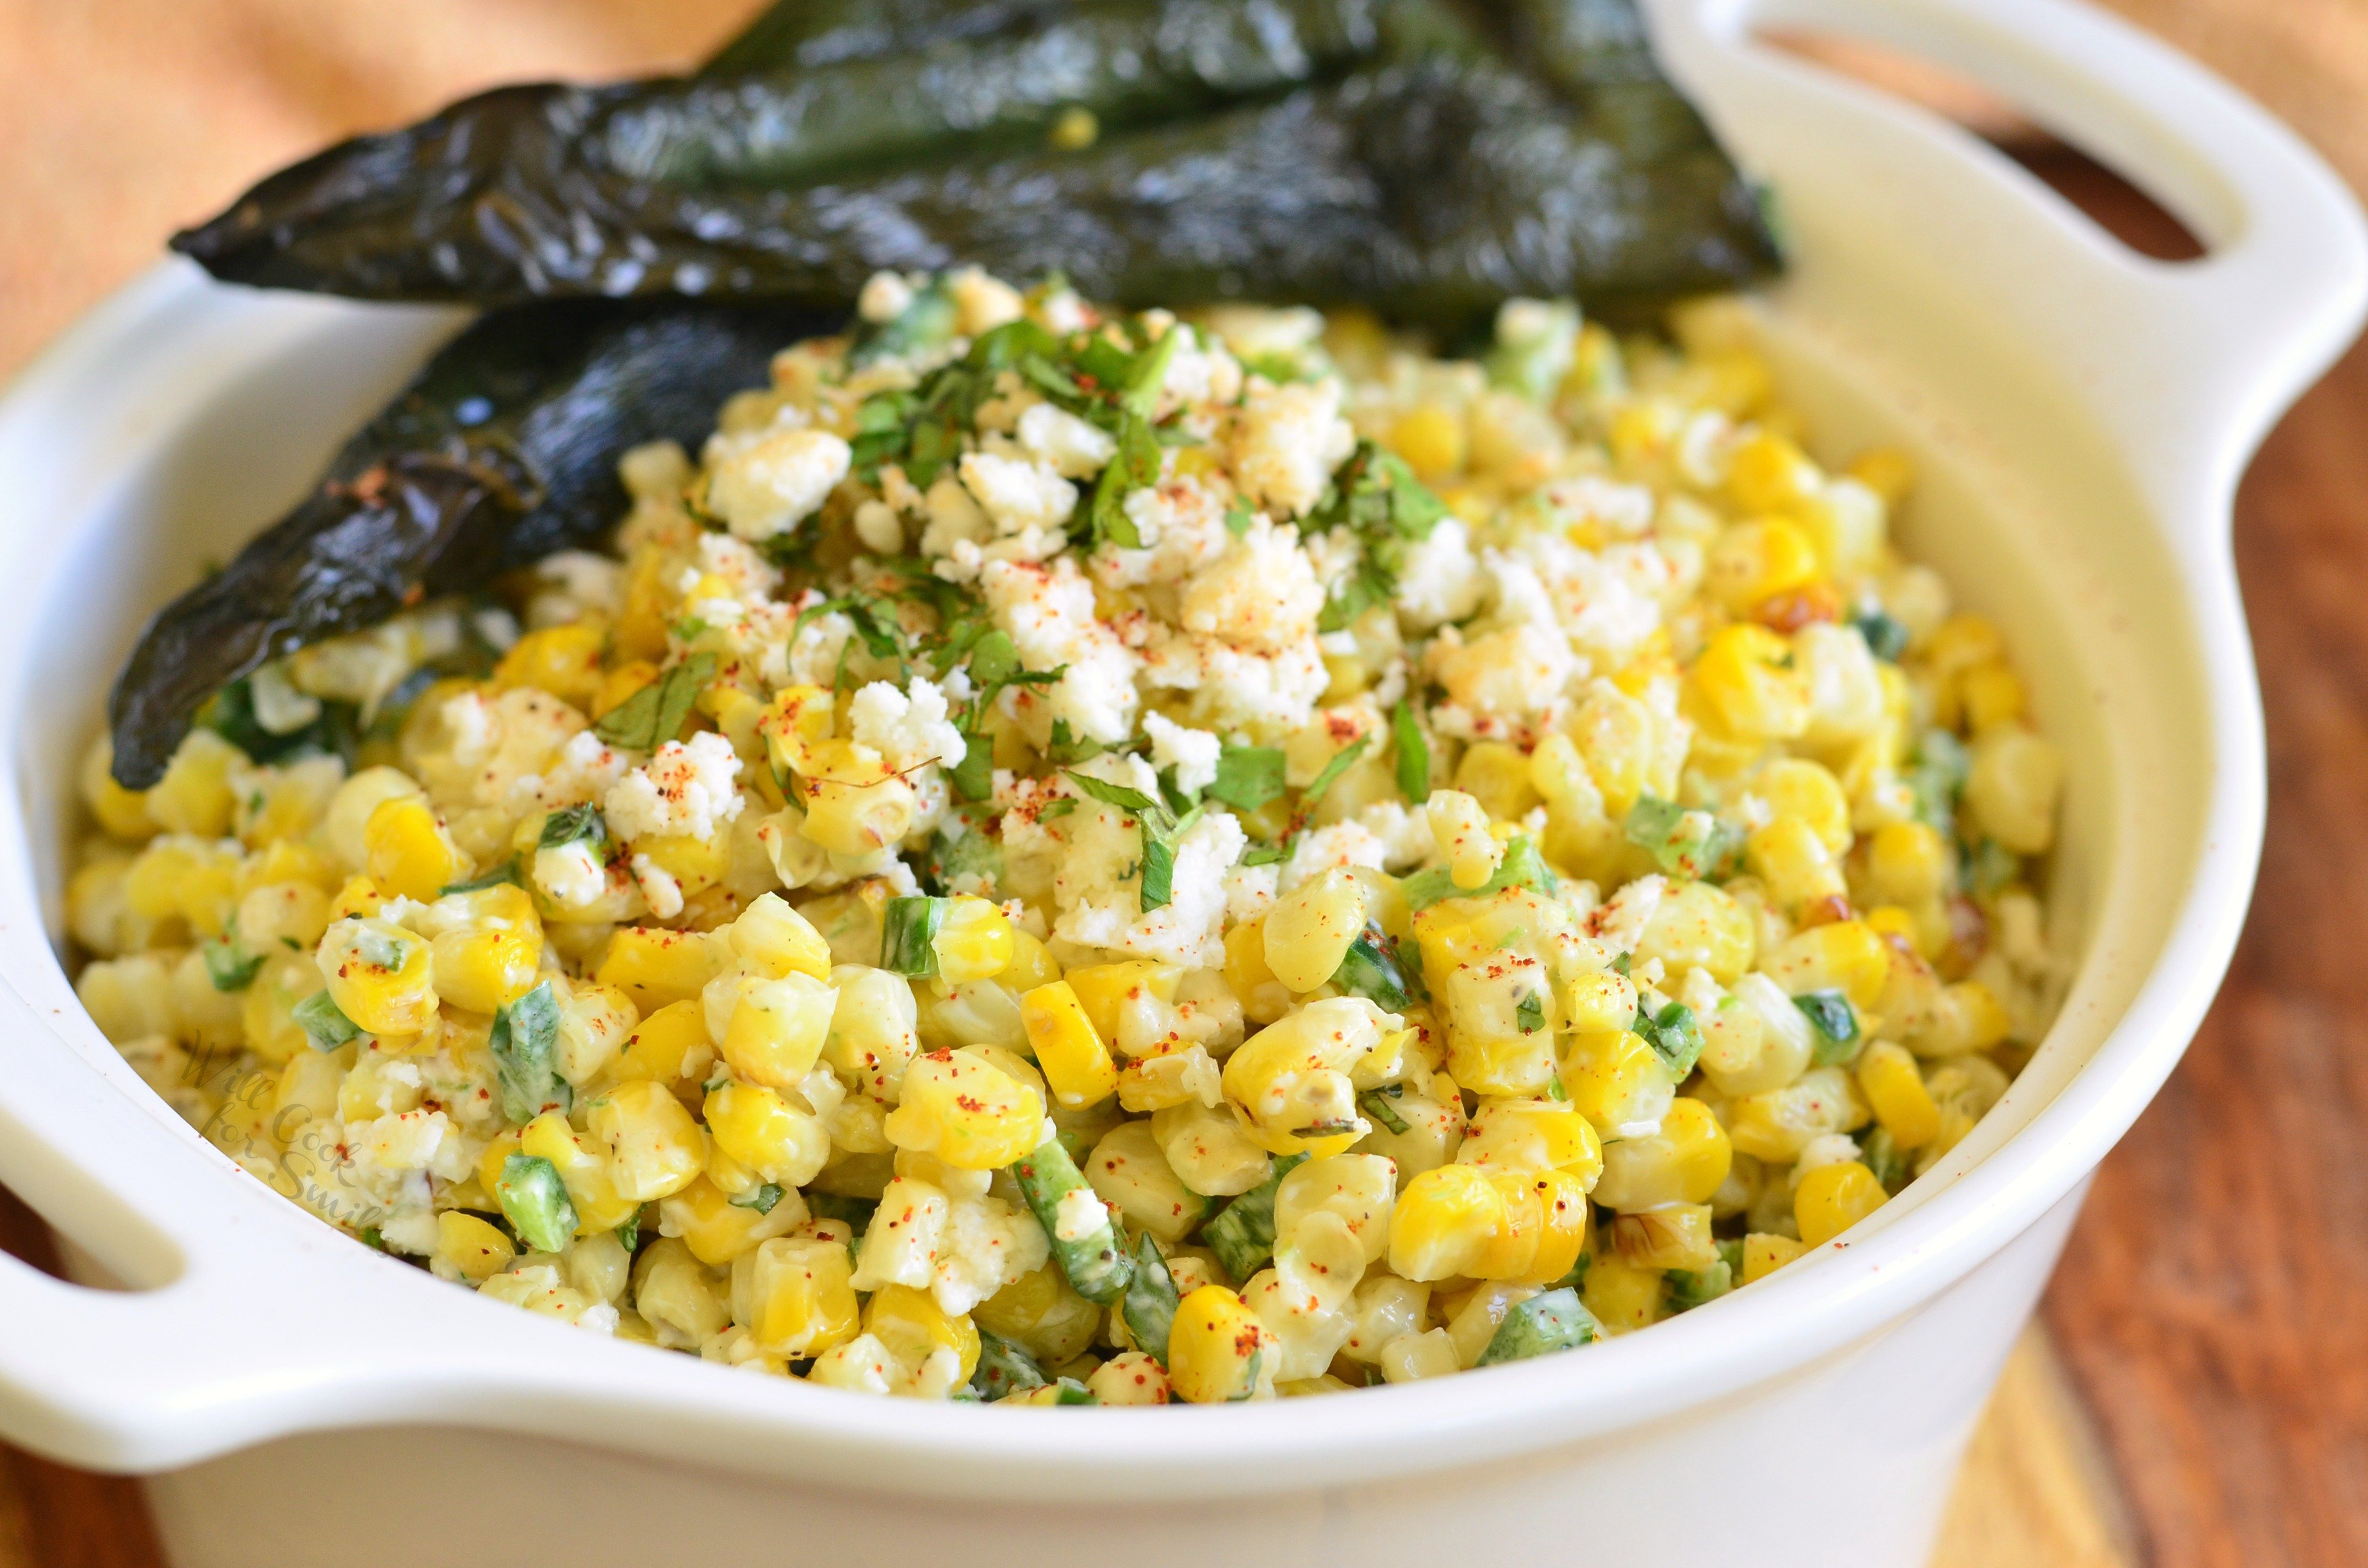 horizontal view of a white bowl filled with corn salad and grilled poblano peppers on the side